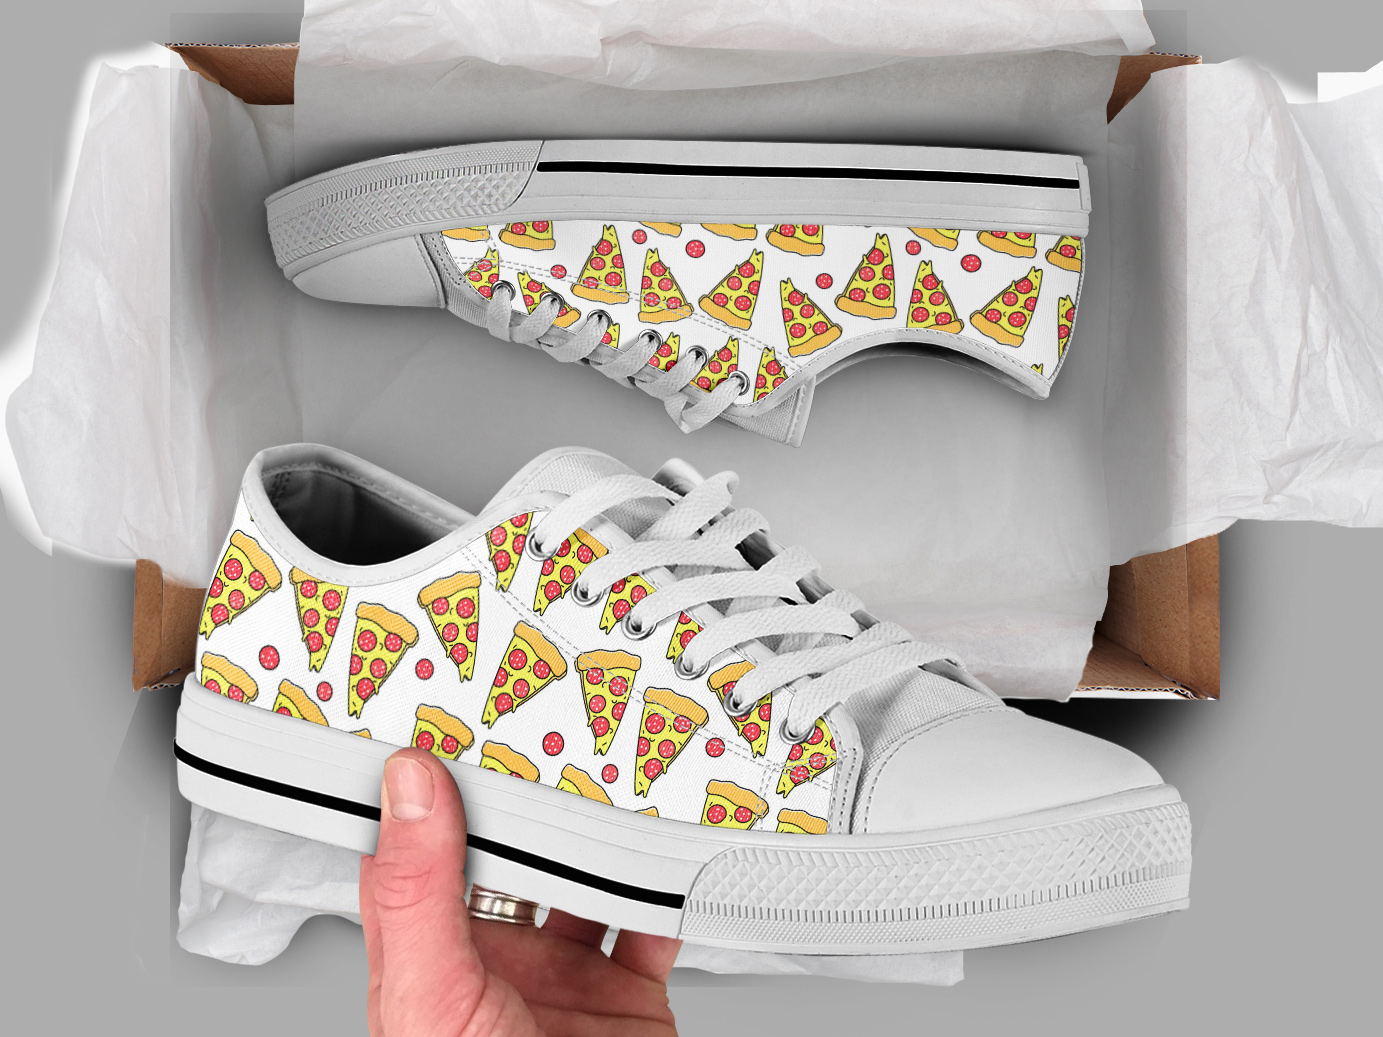 Pizza Gift Shoes | Custom Low Tops Sneakers For Kids & Adults